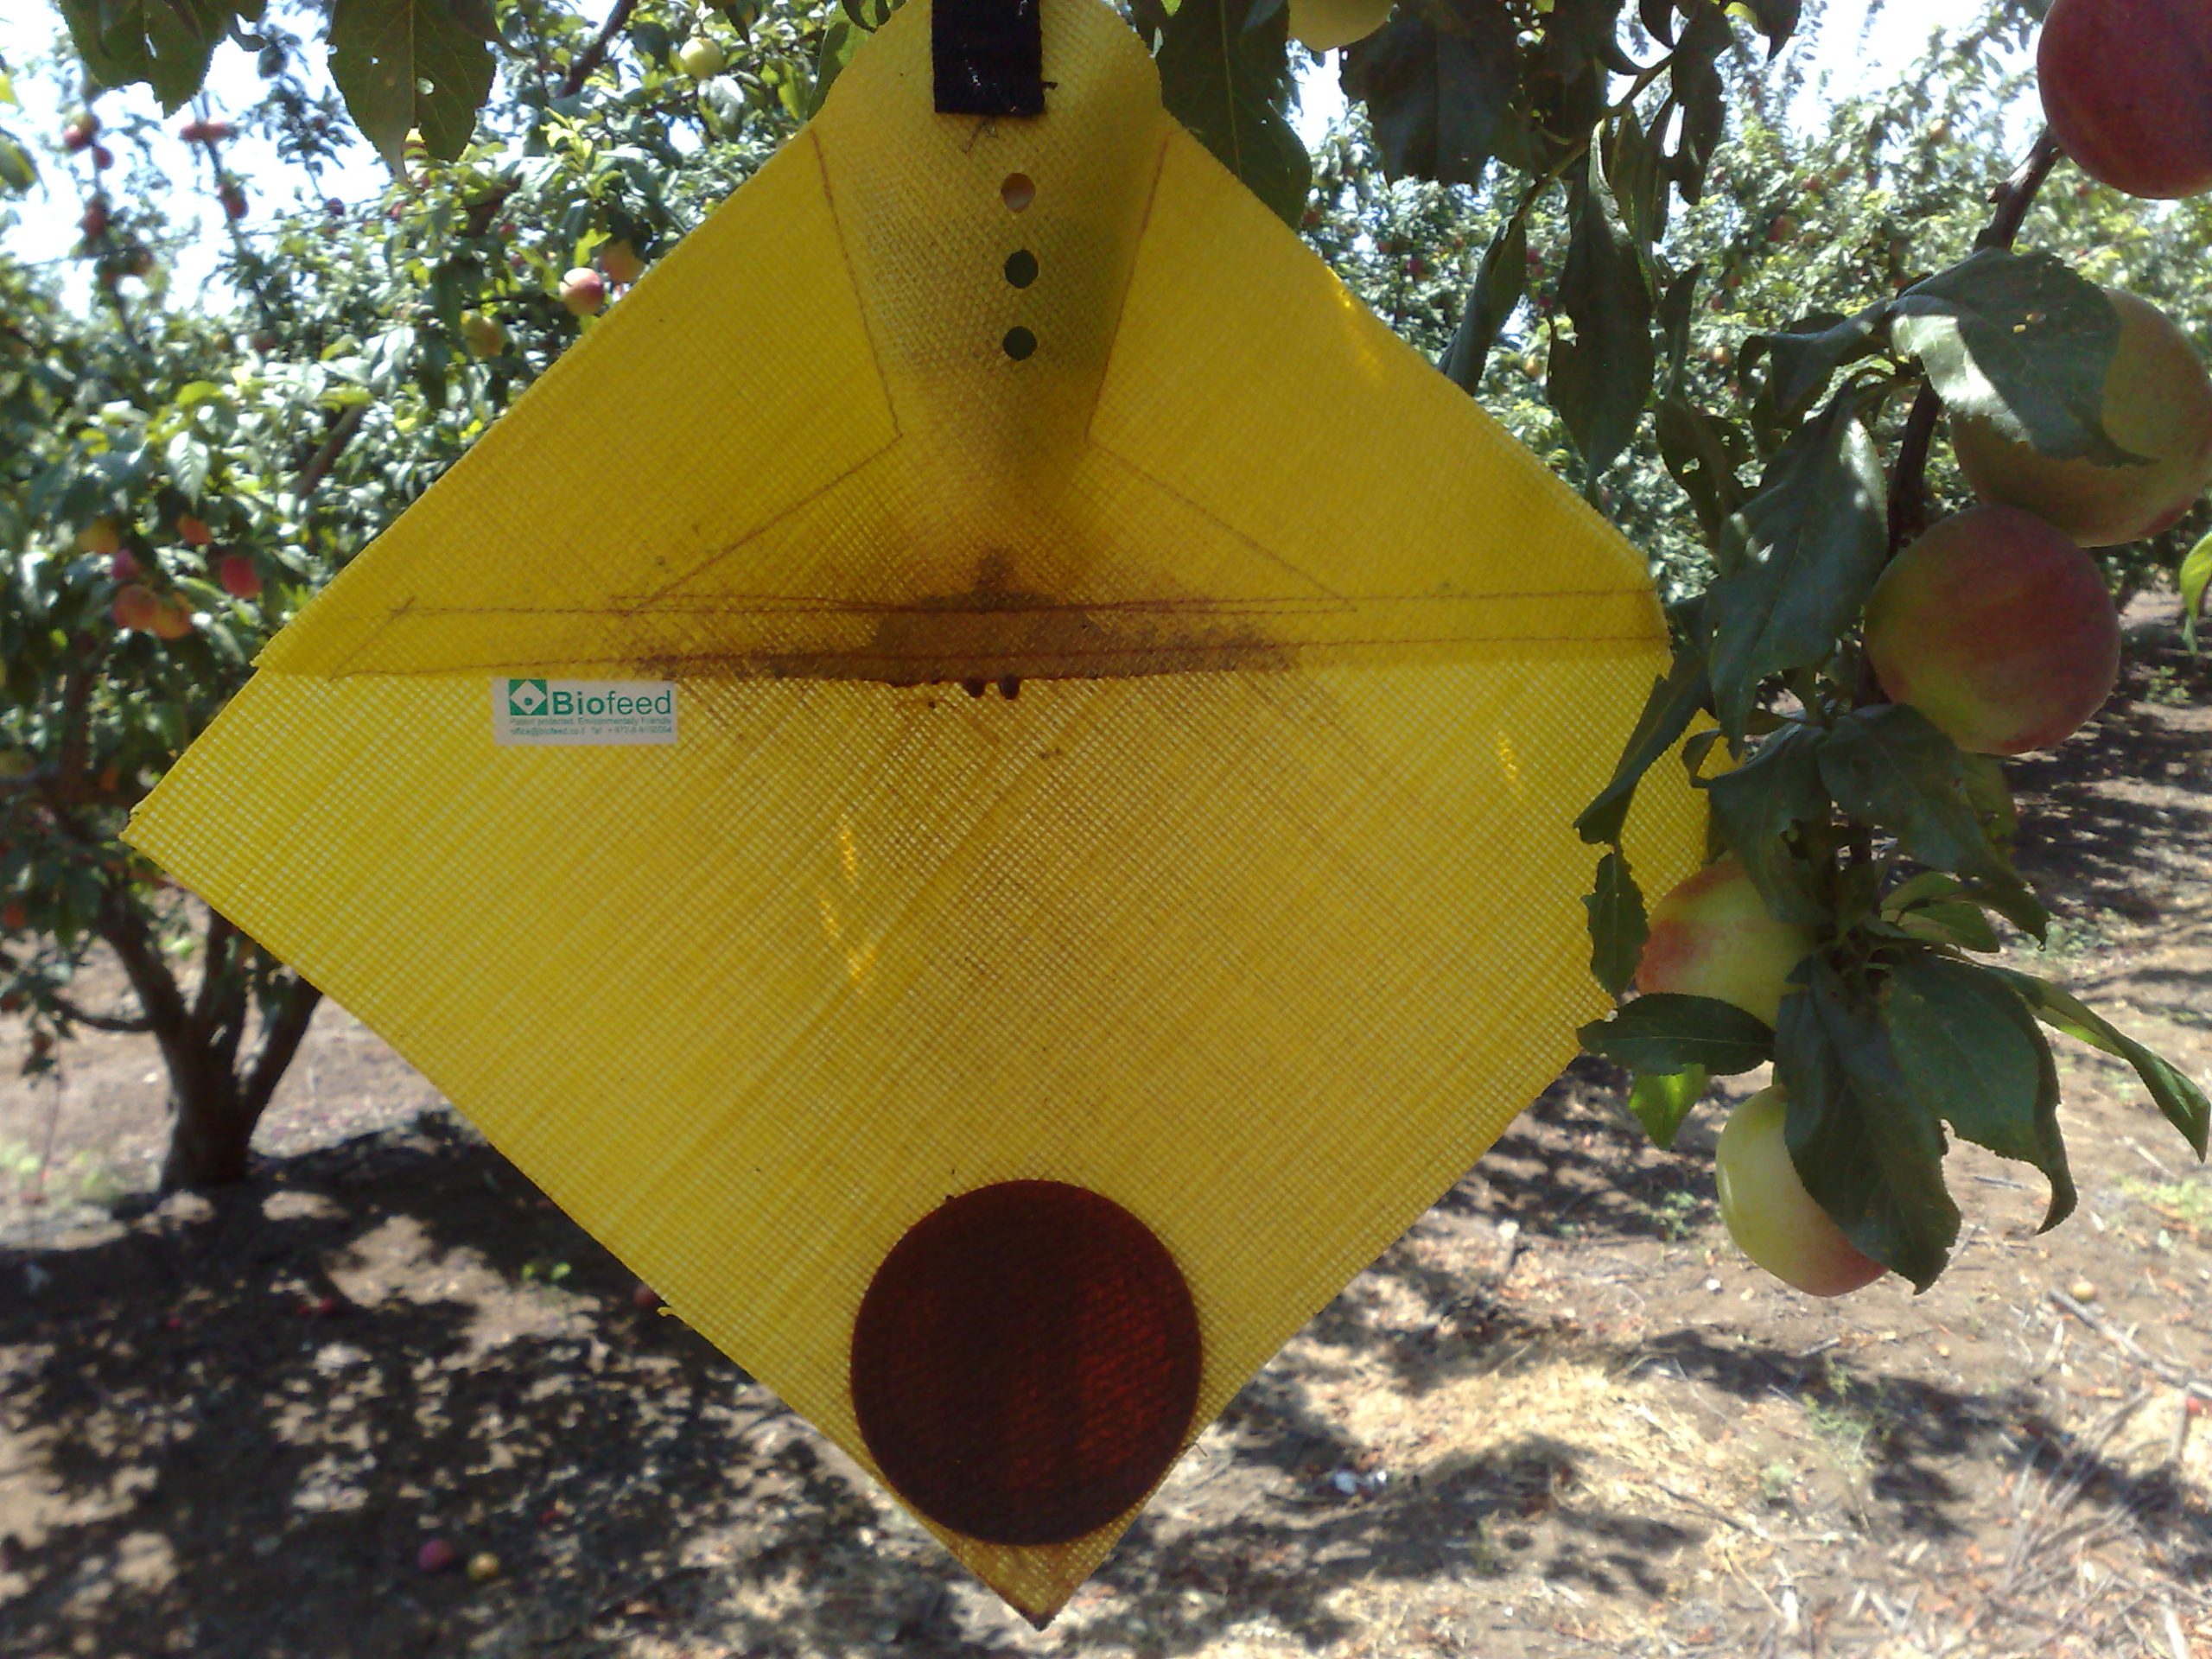 Controlling Mediterranean fruit fly: cover sprays